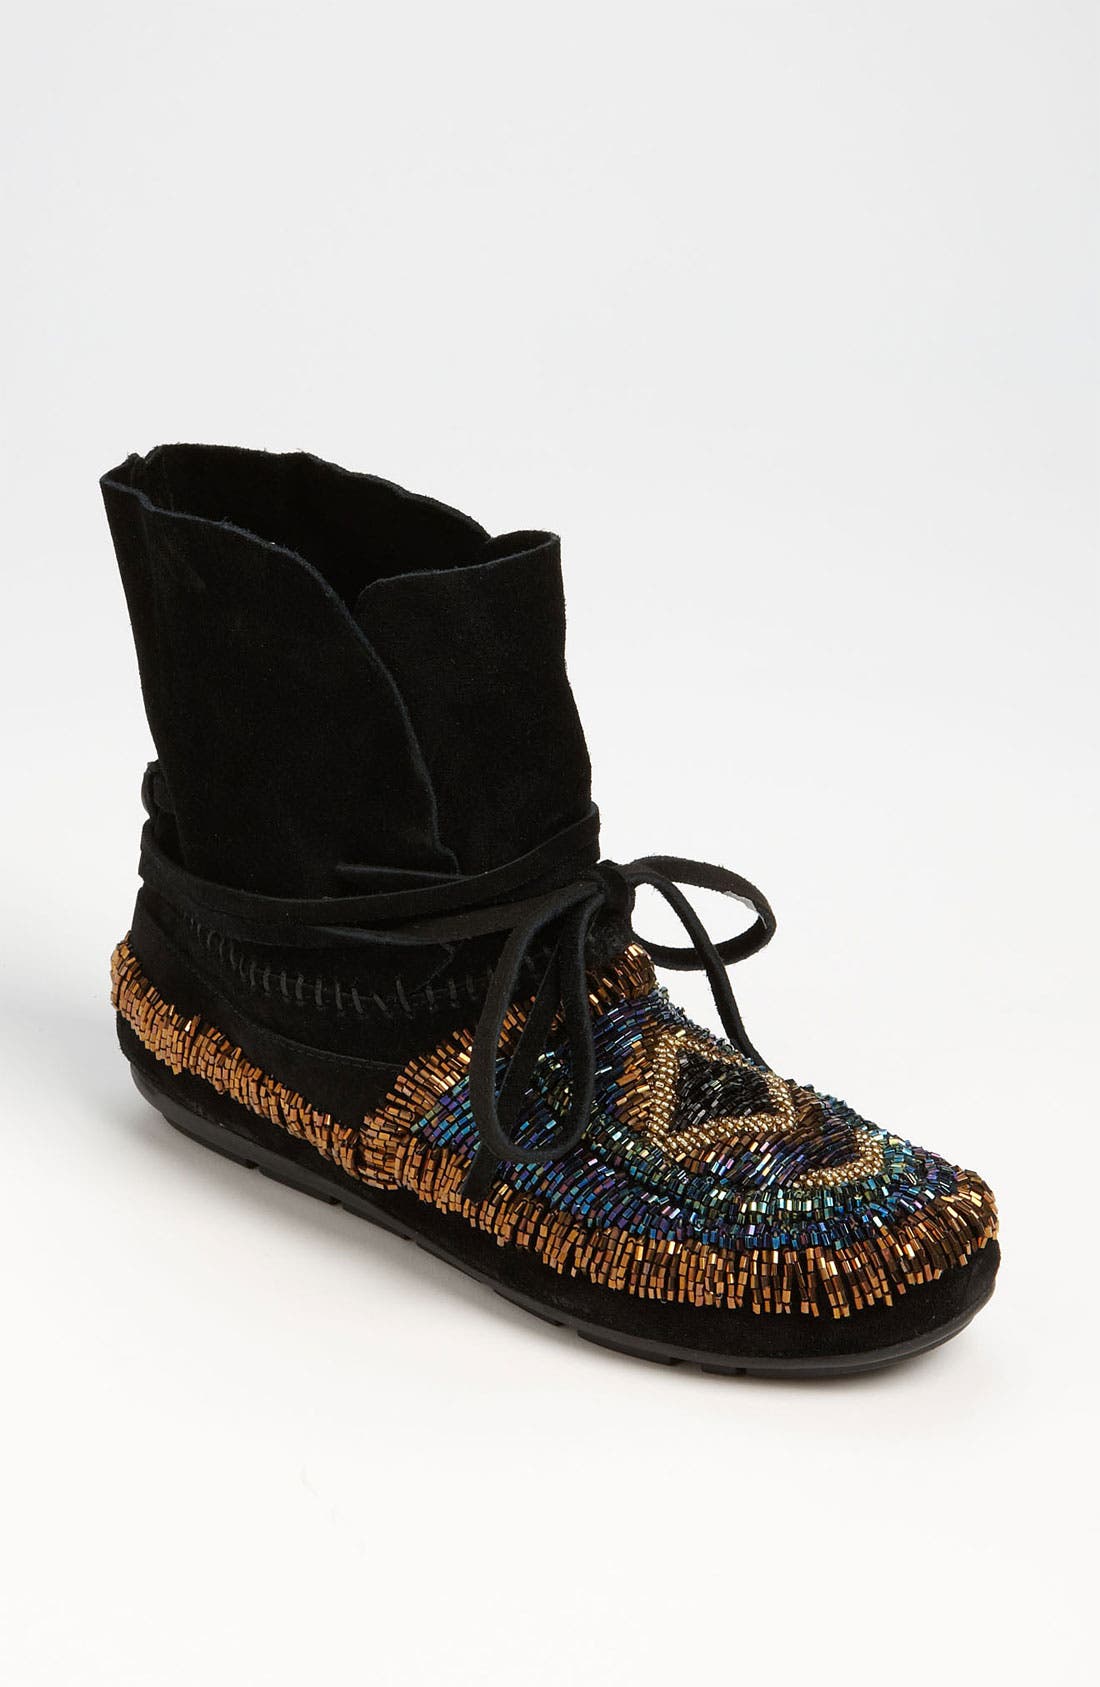 House of Harlow 1960 'Madison' Moccasin 